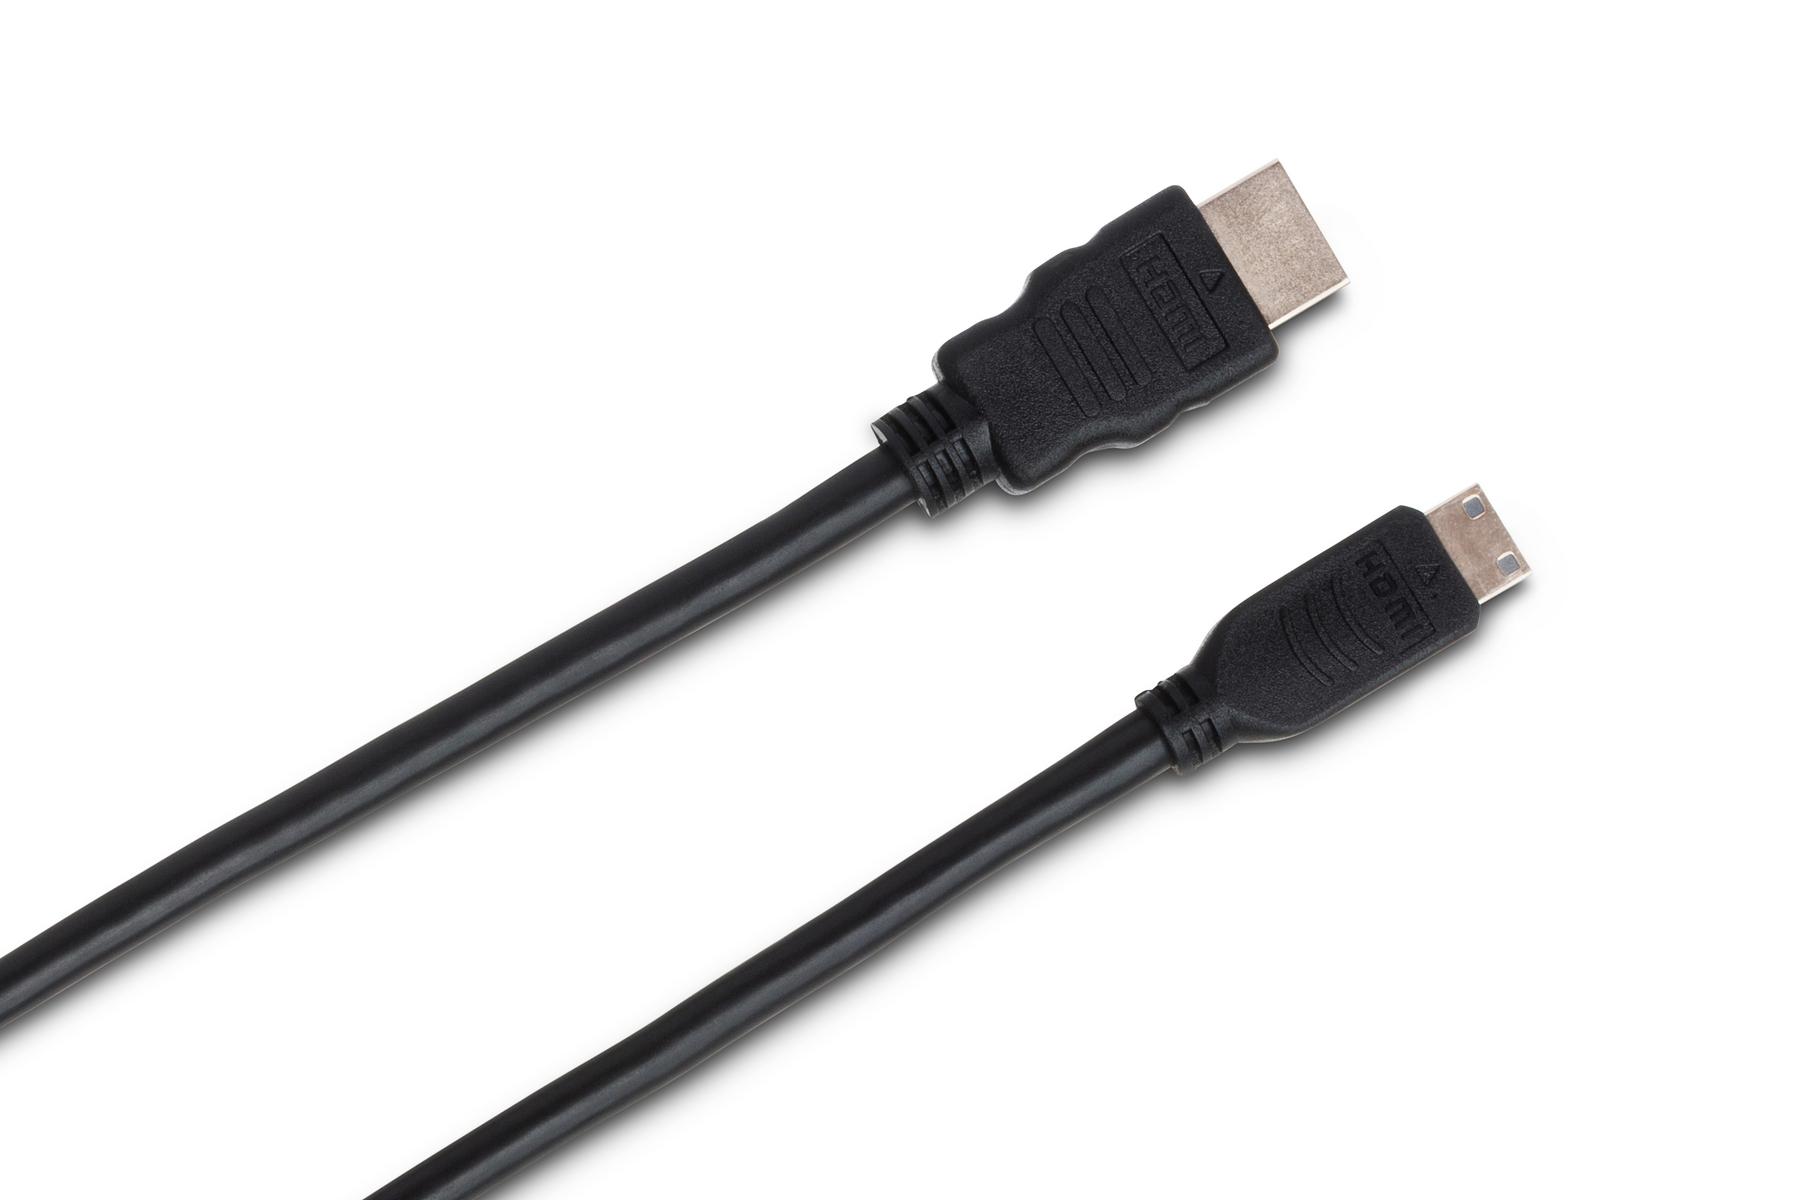 HDMI to HDMI Mini - High Speed HDMI Cable with Ethernet